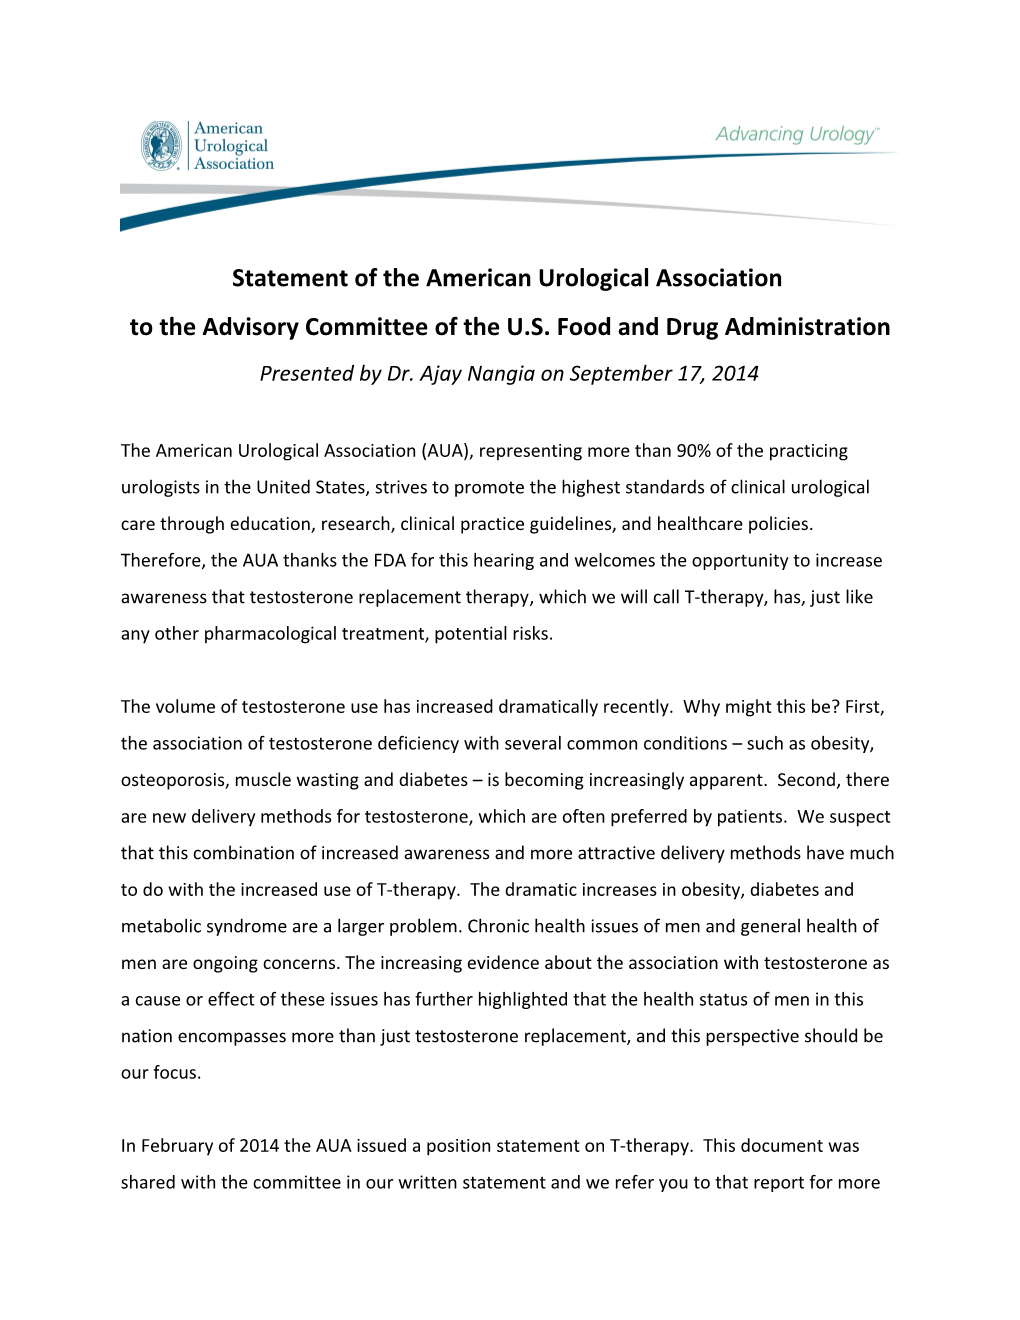 Statement of the American Urological Association to the Advisory Committee of the U.S